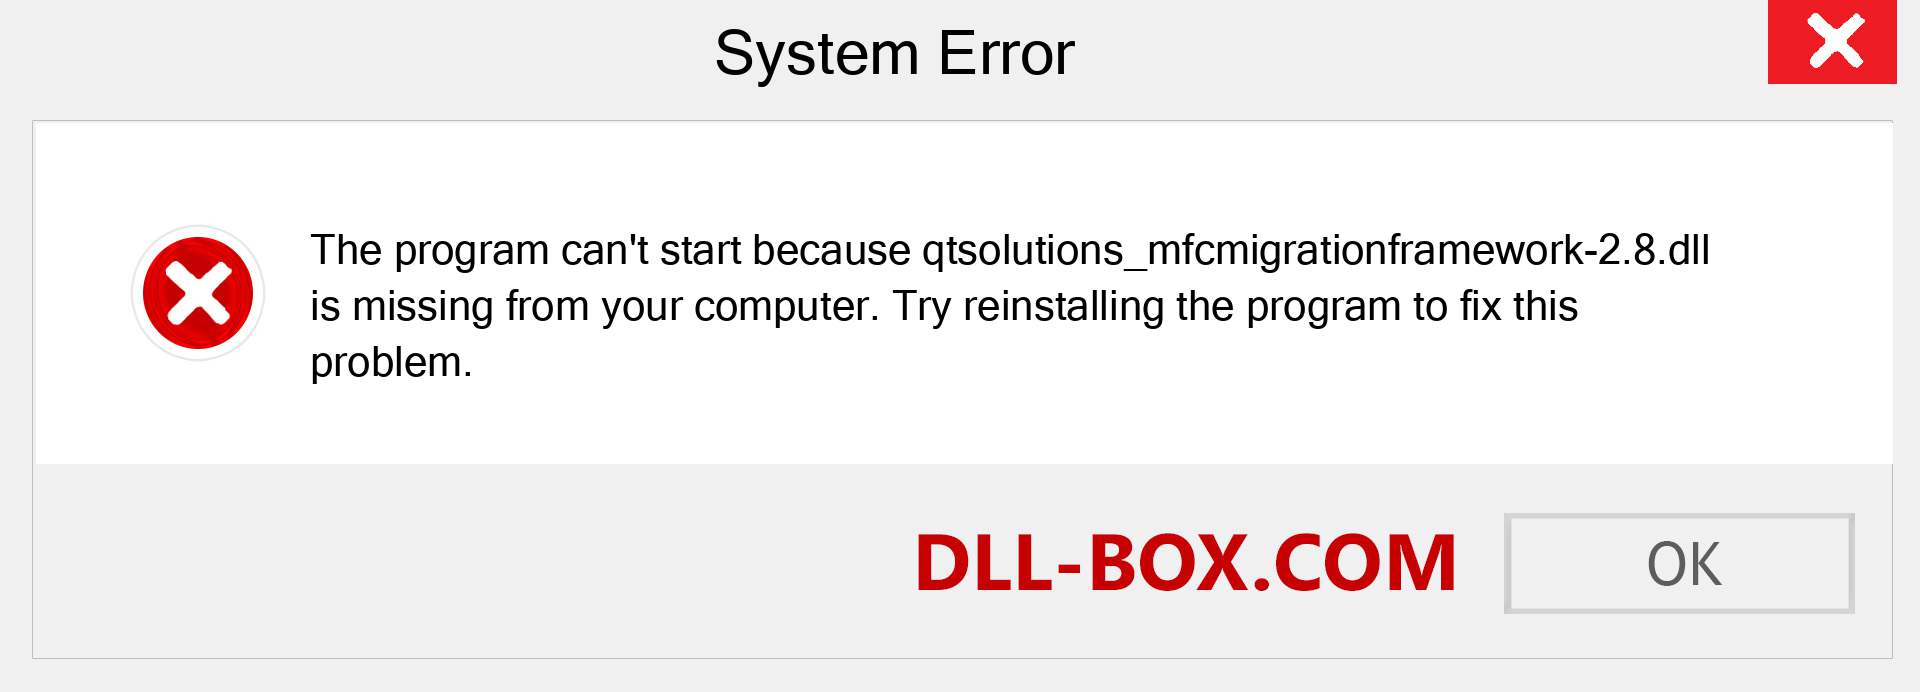  qtsolutions_mfcmigrationframework-2.8.dll file is missing?. Download for Windows 7, 8, 10 - Fix  qtsolutions_mfcmigrationframework-2.8 dll Missing Error on Windows, photos, images